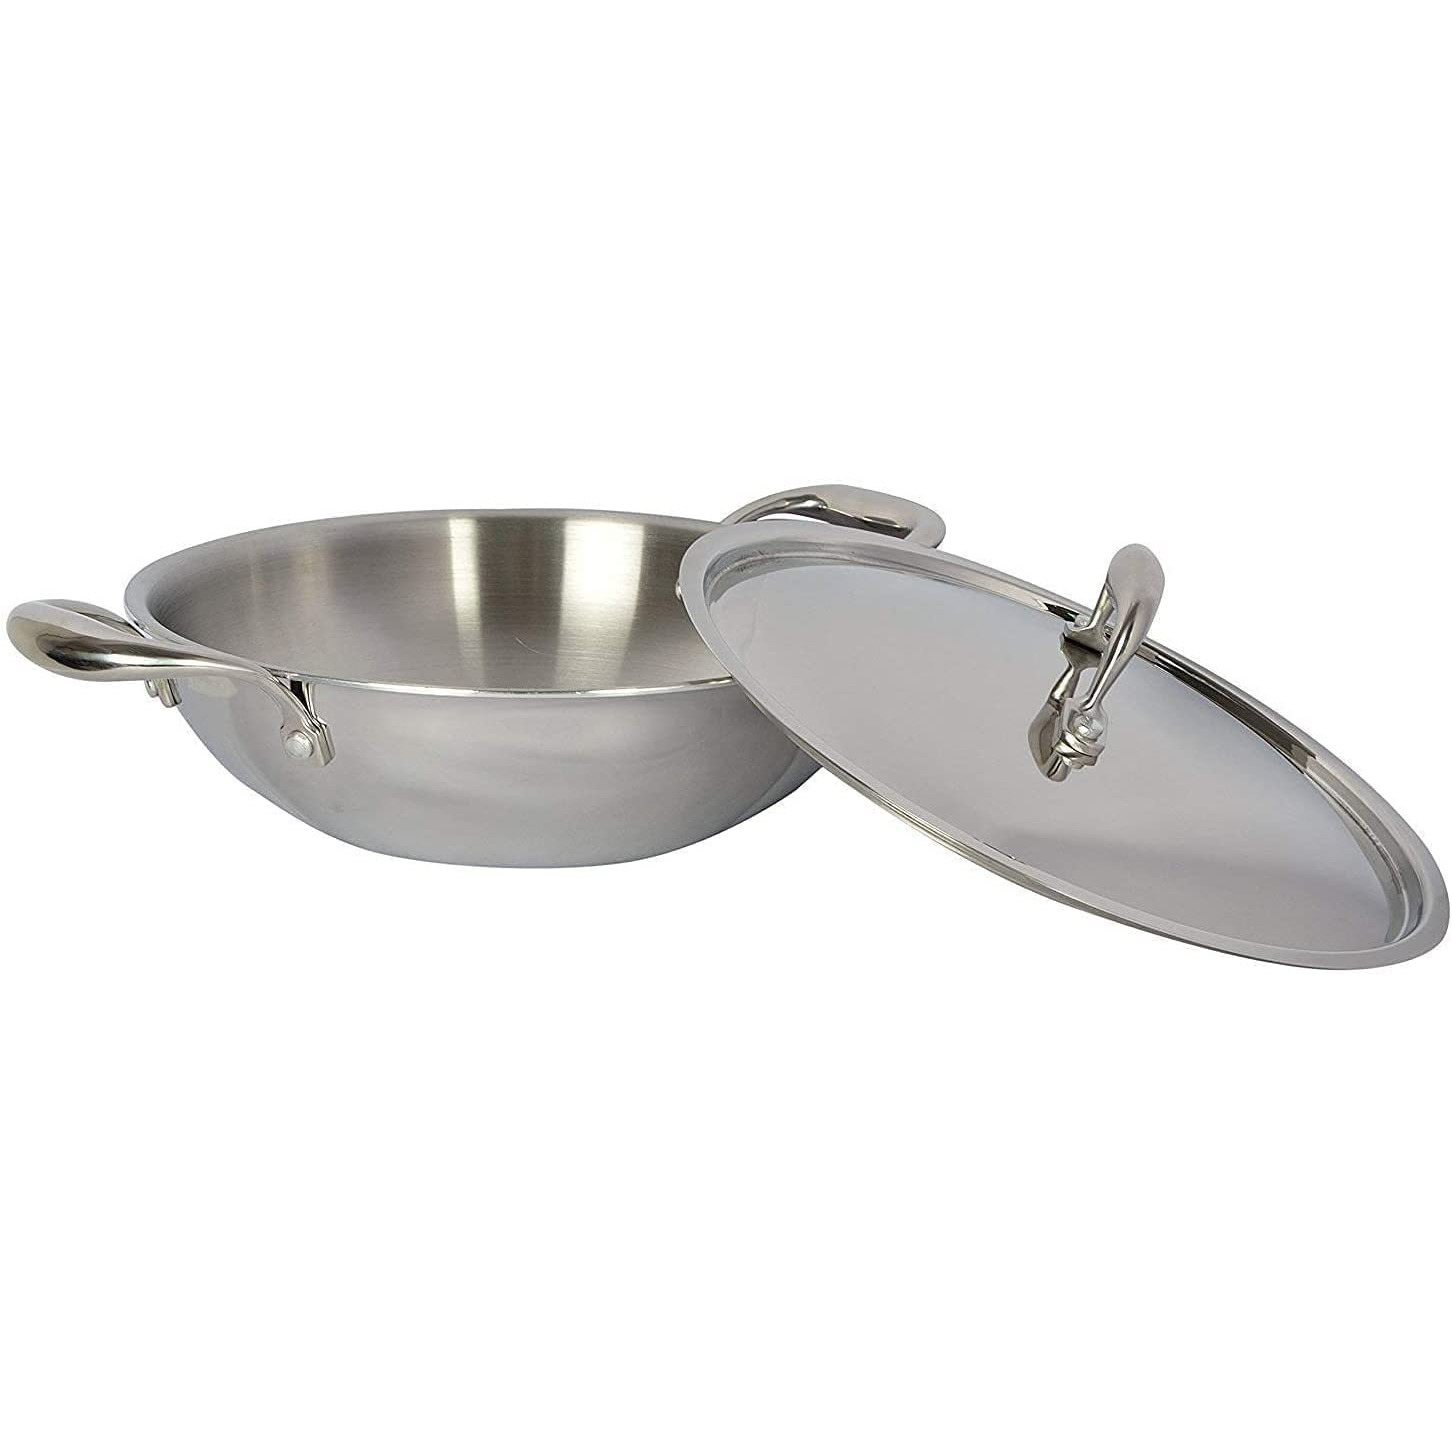 Tabakh Food Grade 3.2 Liter Induction Friendly Platinum (TRI PLY) 18/8 Stainless Steel Kadai w/ Stainless Steel Lid (26cm, 3.2 Litre)